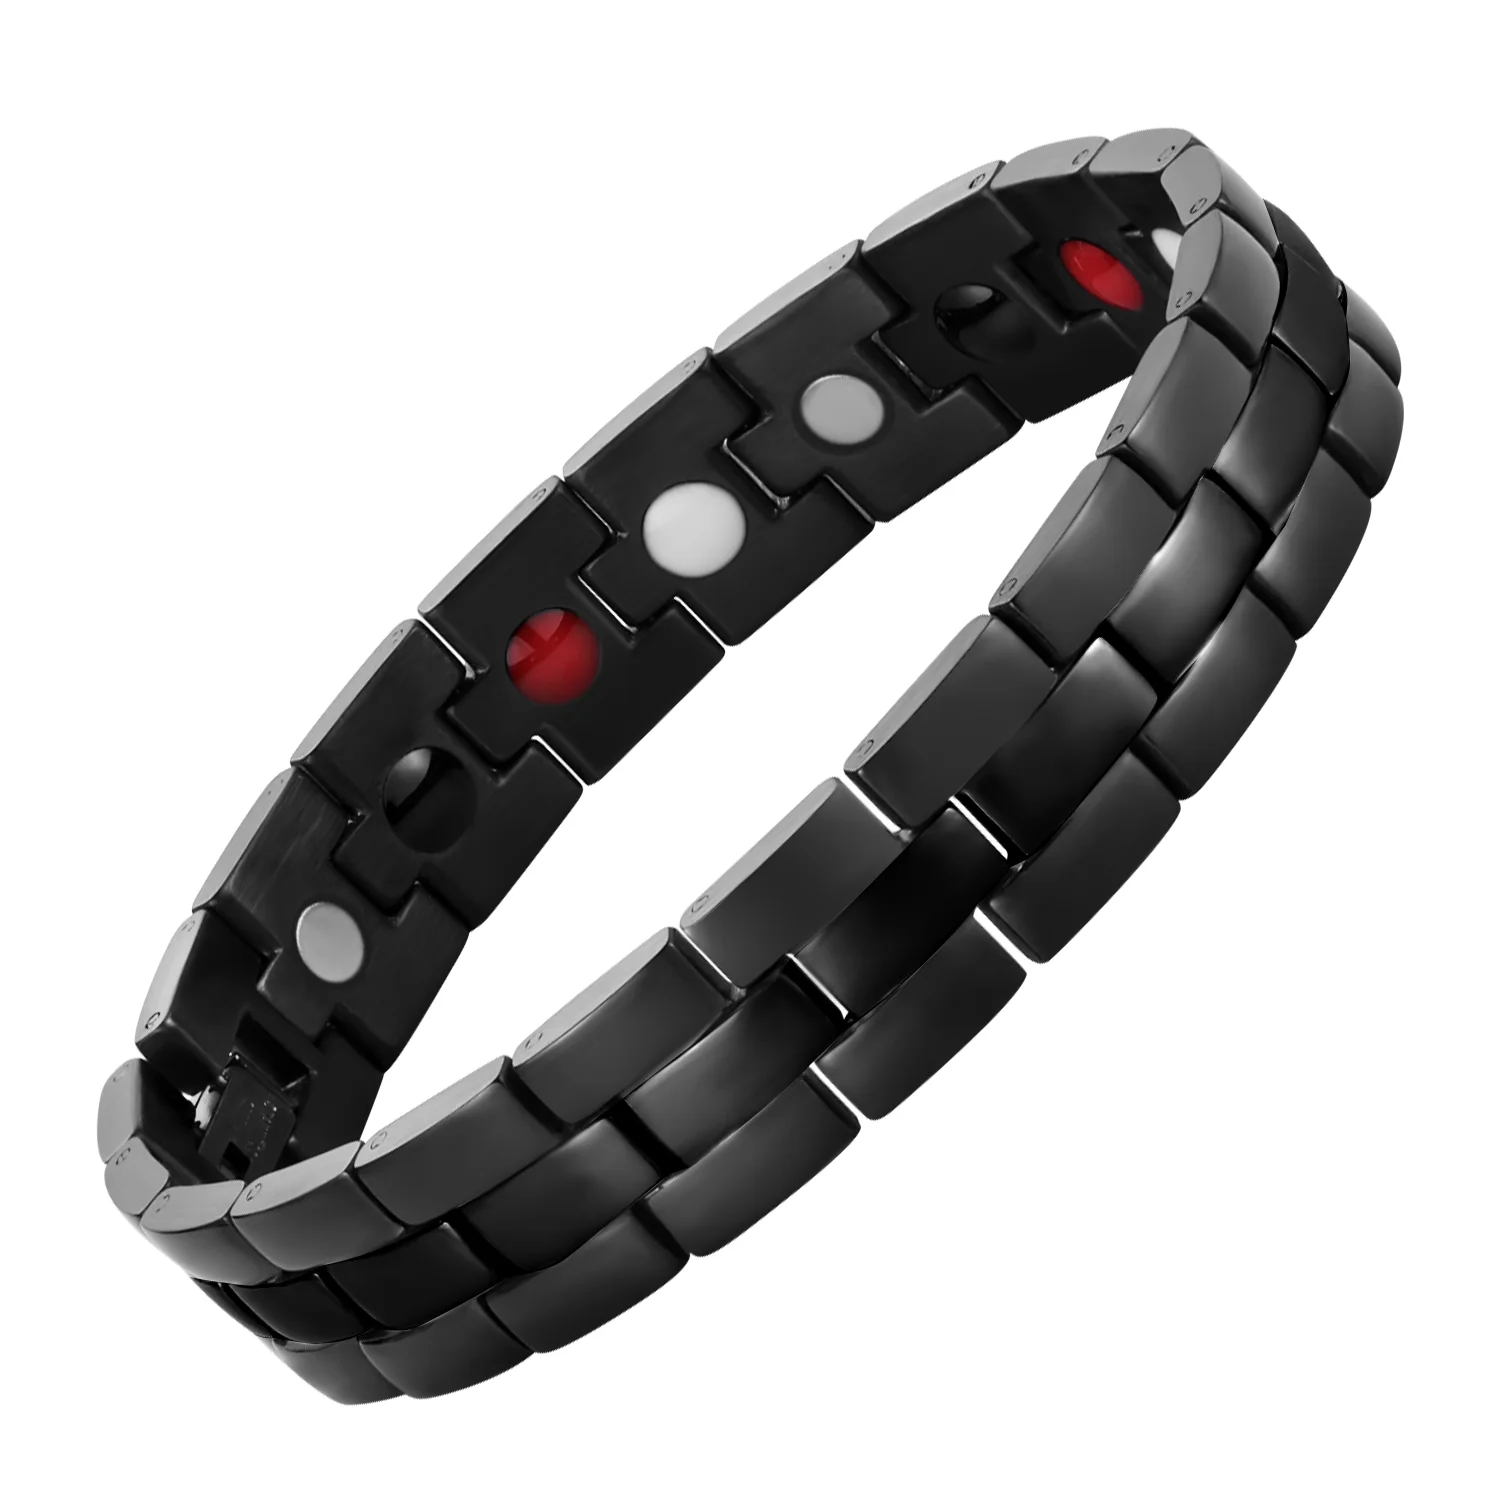 

Healing Magnetic Therapy Bracelet Bio Energy Germanium Stainless Bangles for Arthritis Hand Pain Relief